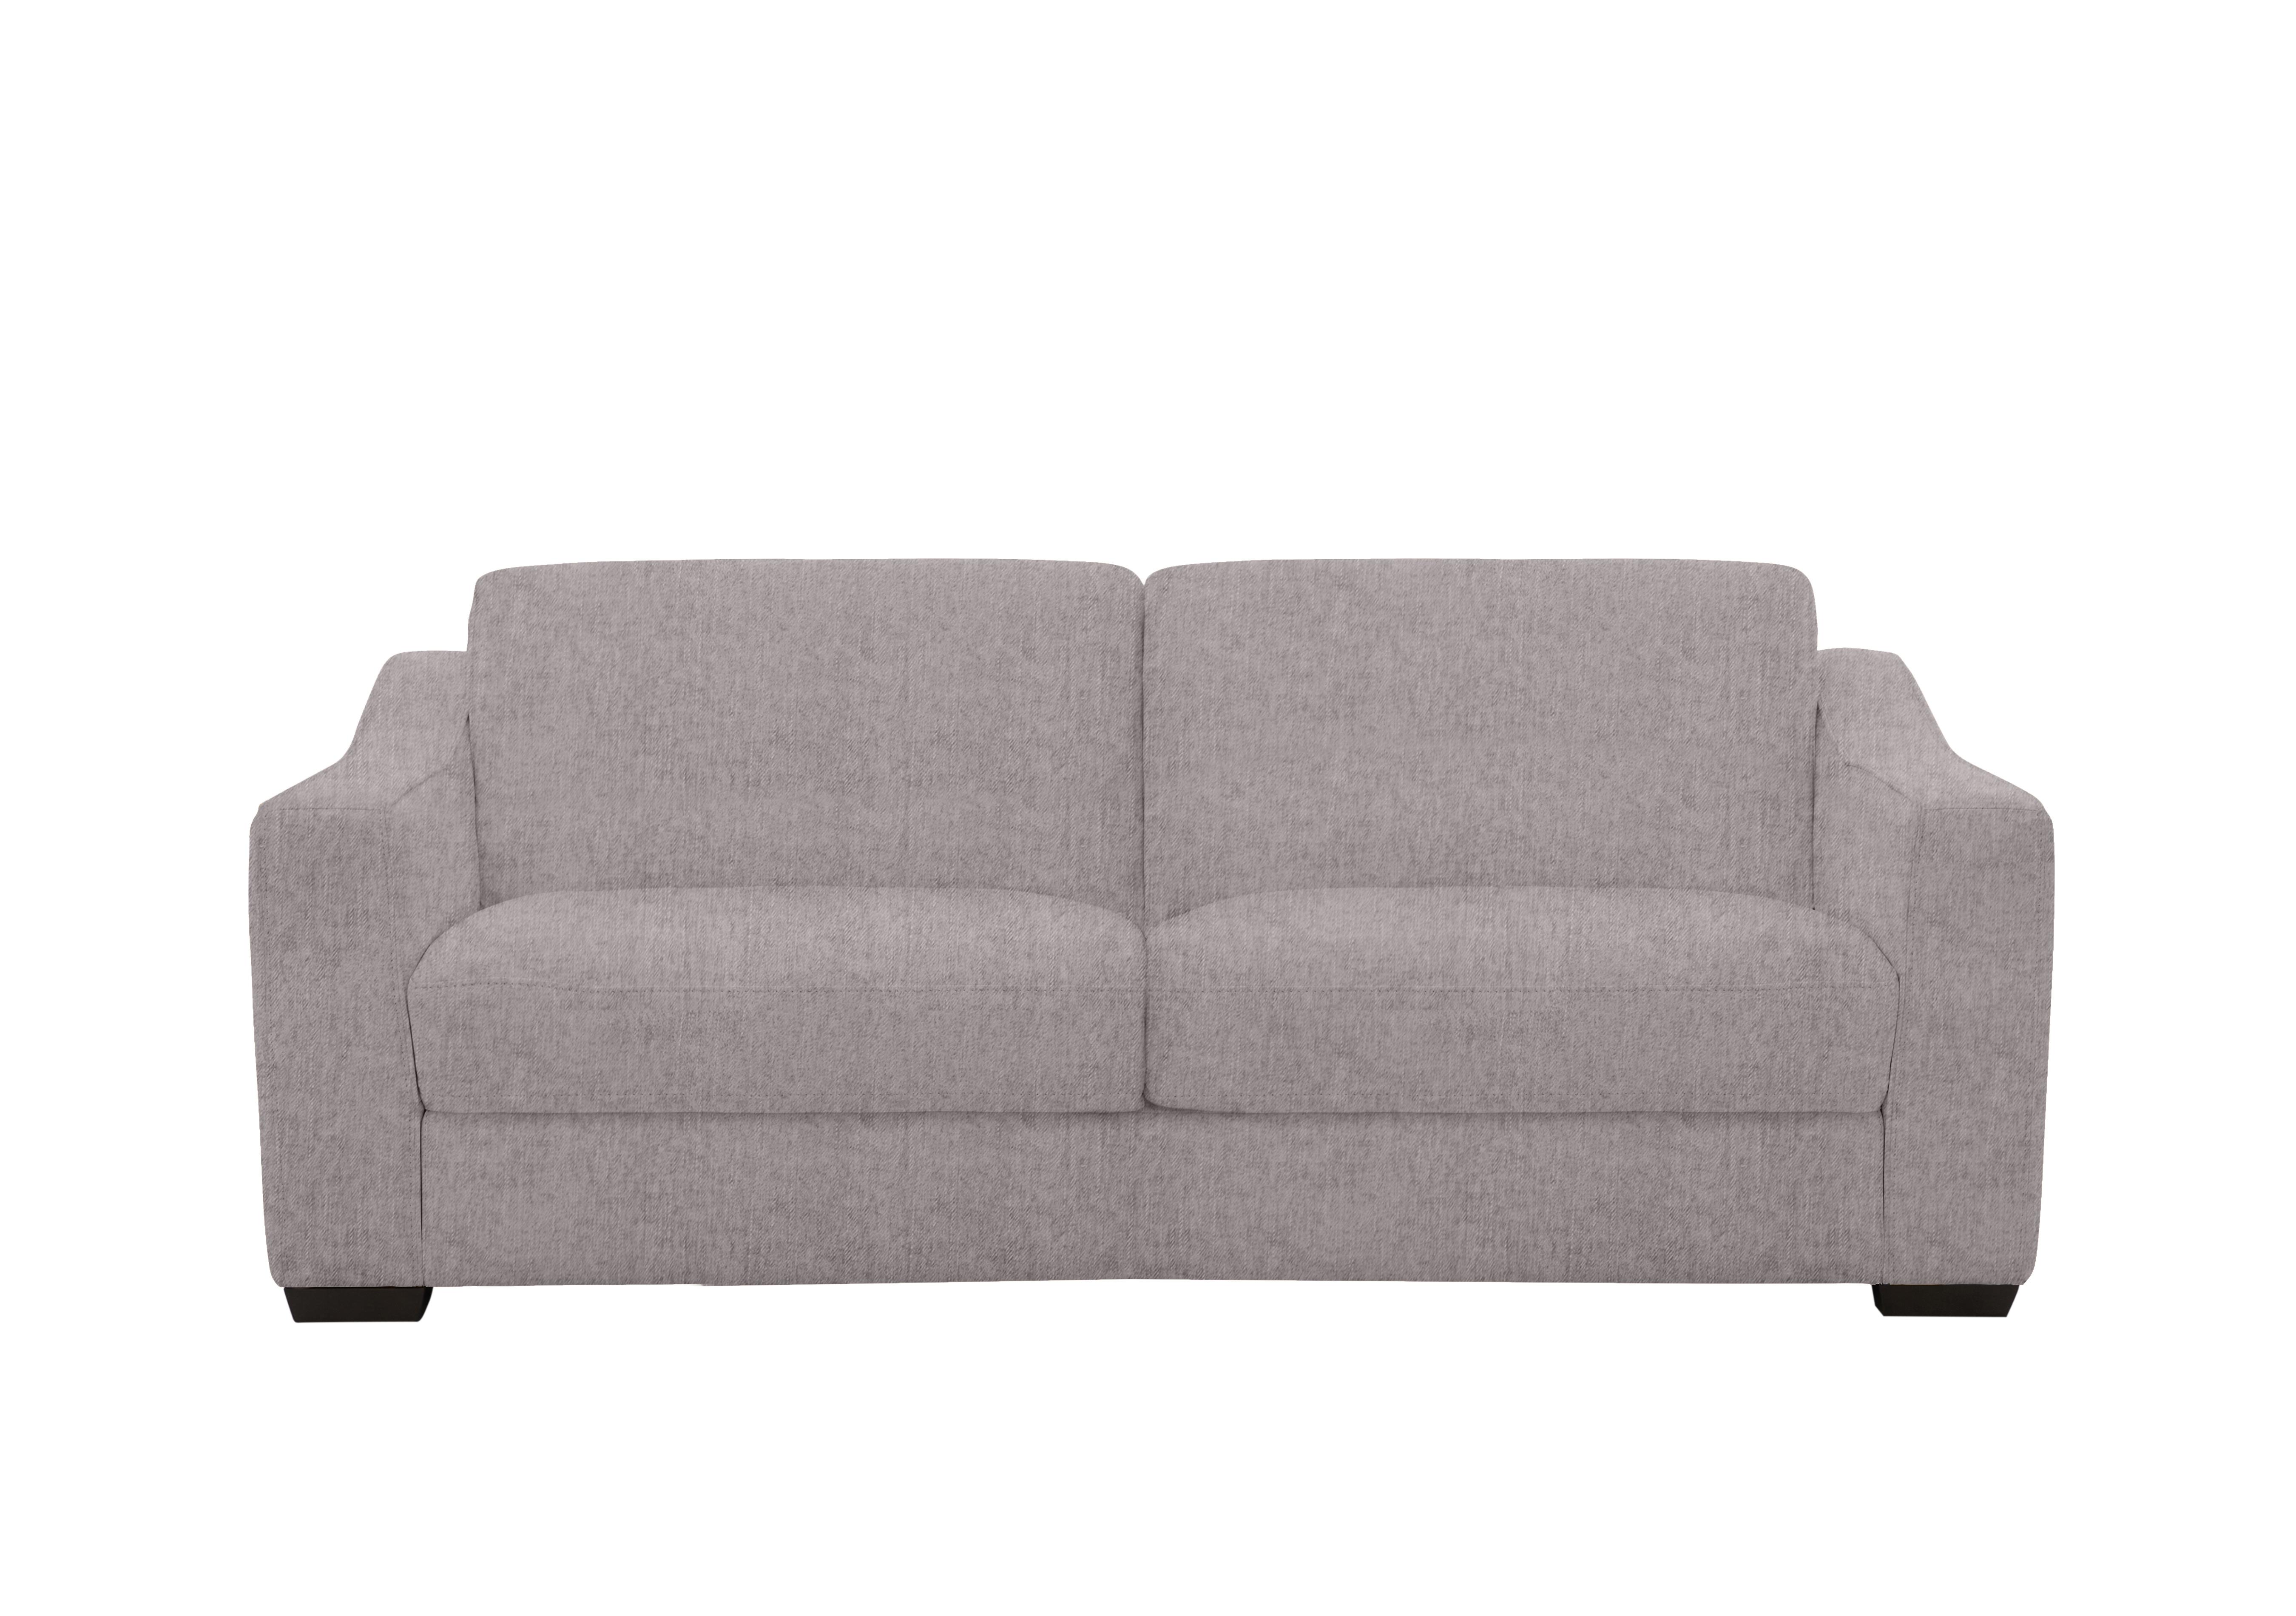 Optimus Space Saving Fabric Sofa Bed with Memory Foam Mattress in Fab-Meo-R27 Pewter on Furniture Village